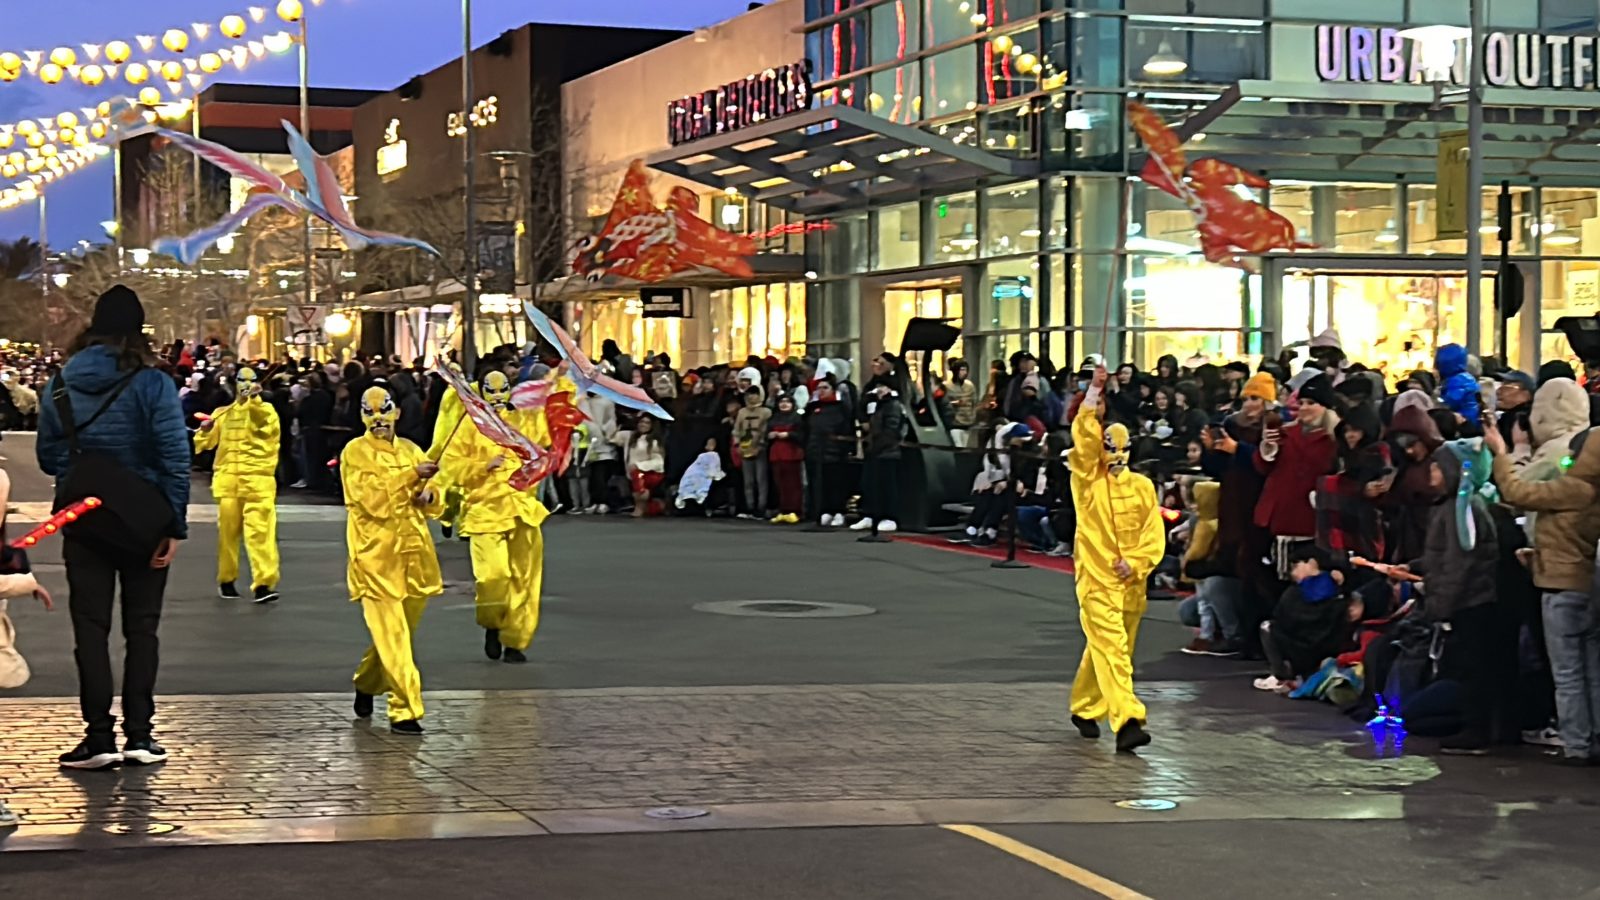 Downtown Summerlin to celebrate Lunar New Year with free parade